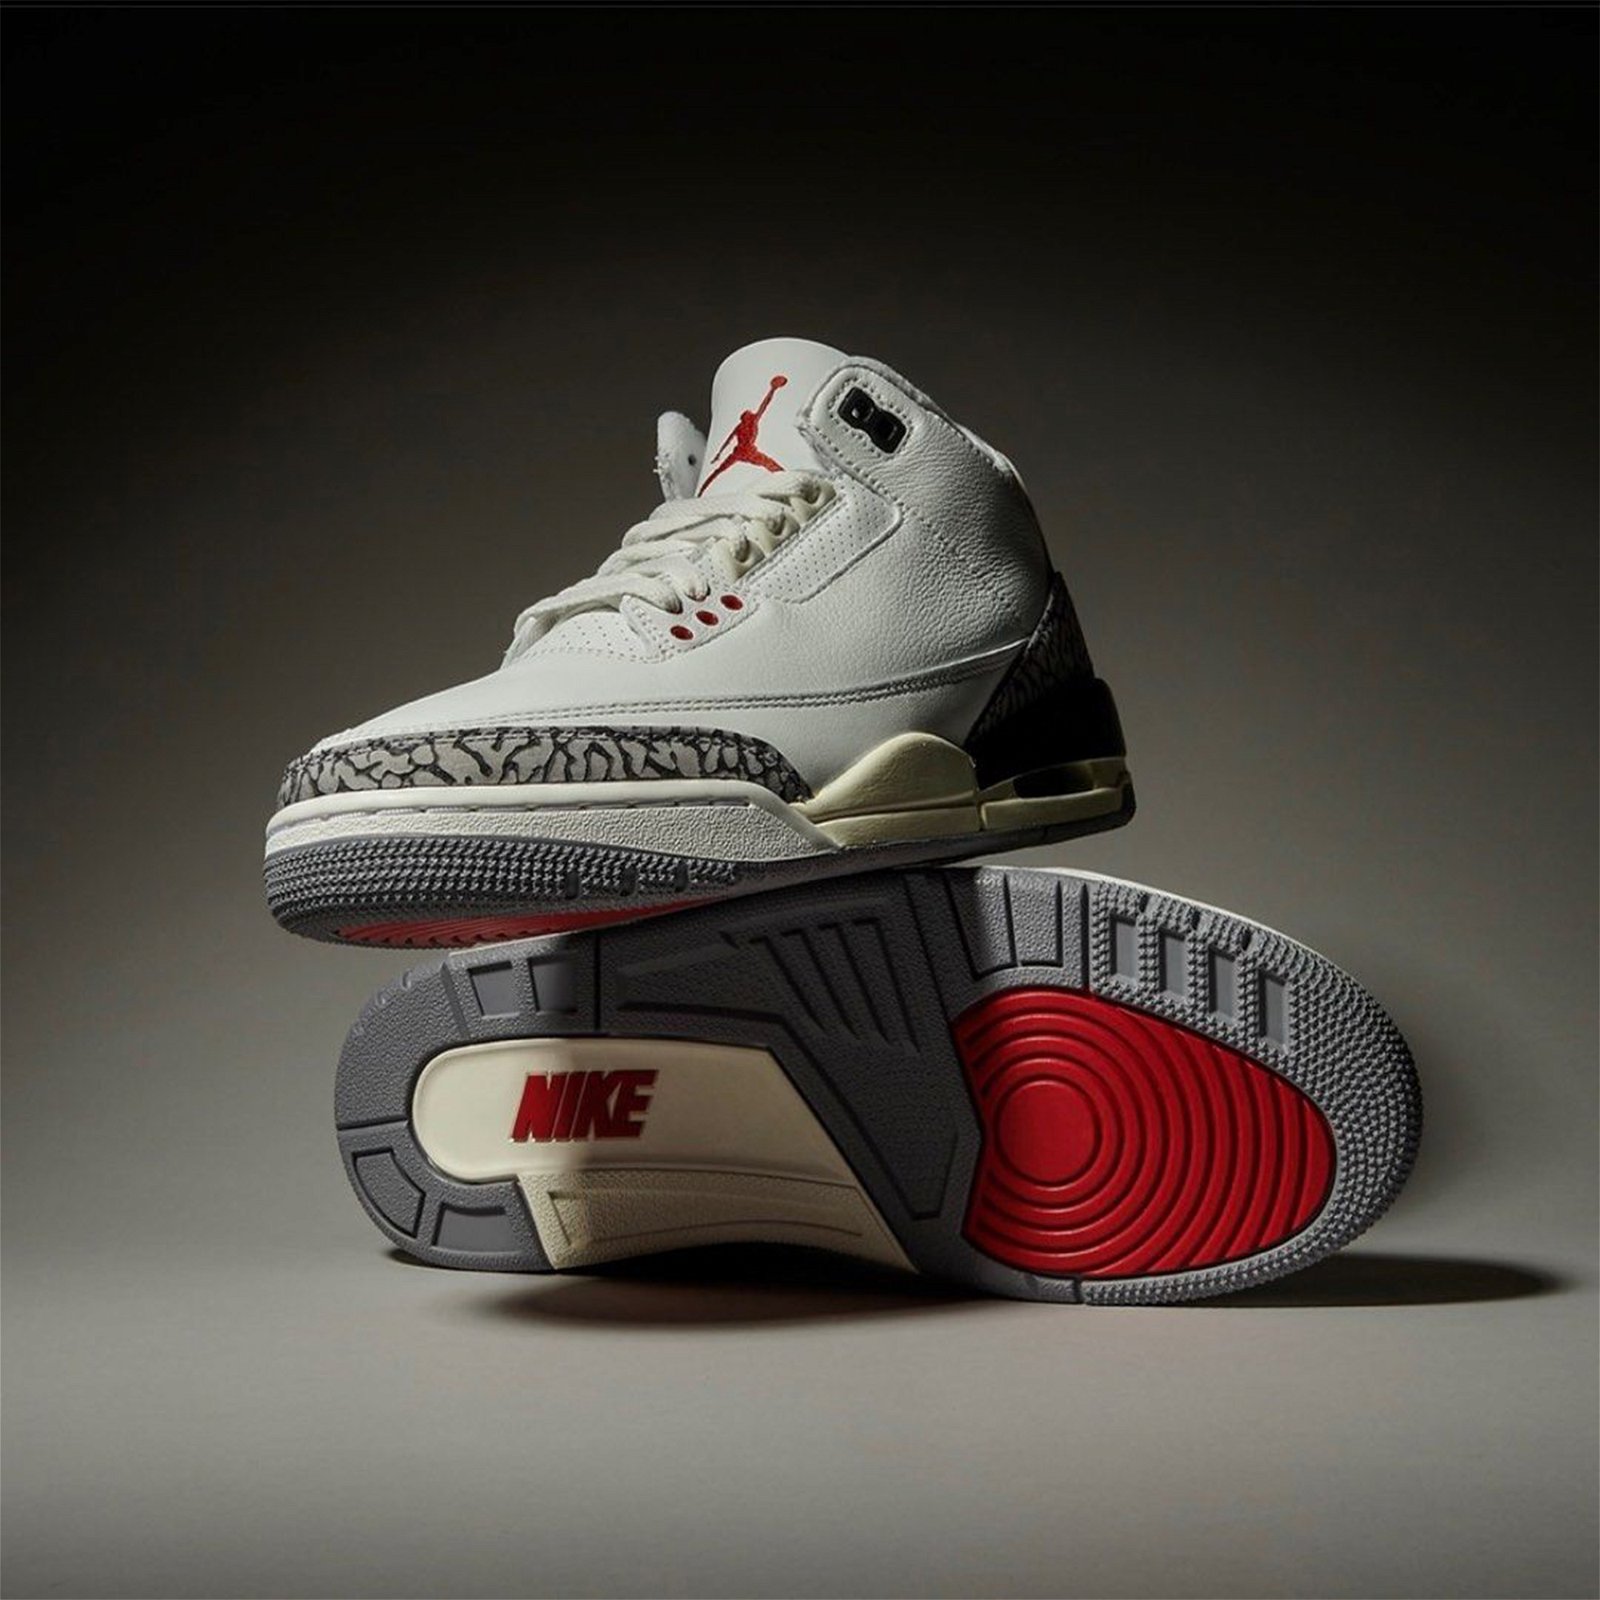 Sneakers of the Week by FlexDog - Air Jordan 3 Retro "White Cement Reimagined"